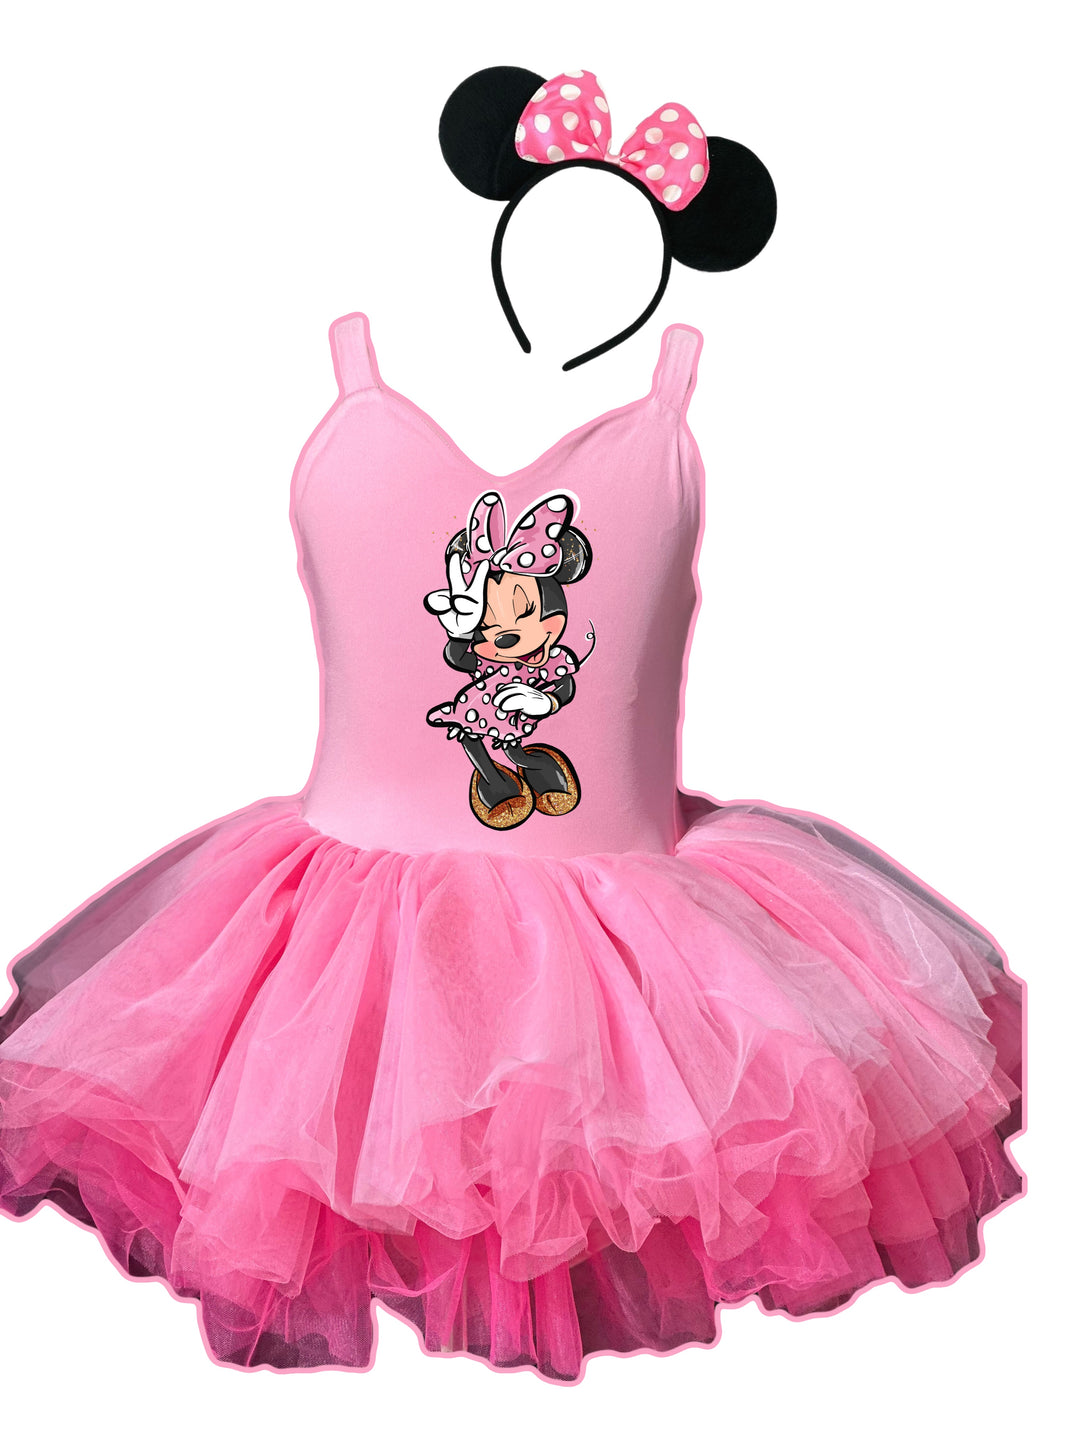 Sassy Mouse soft tulle